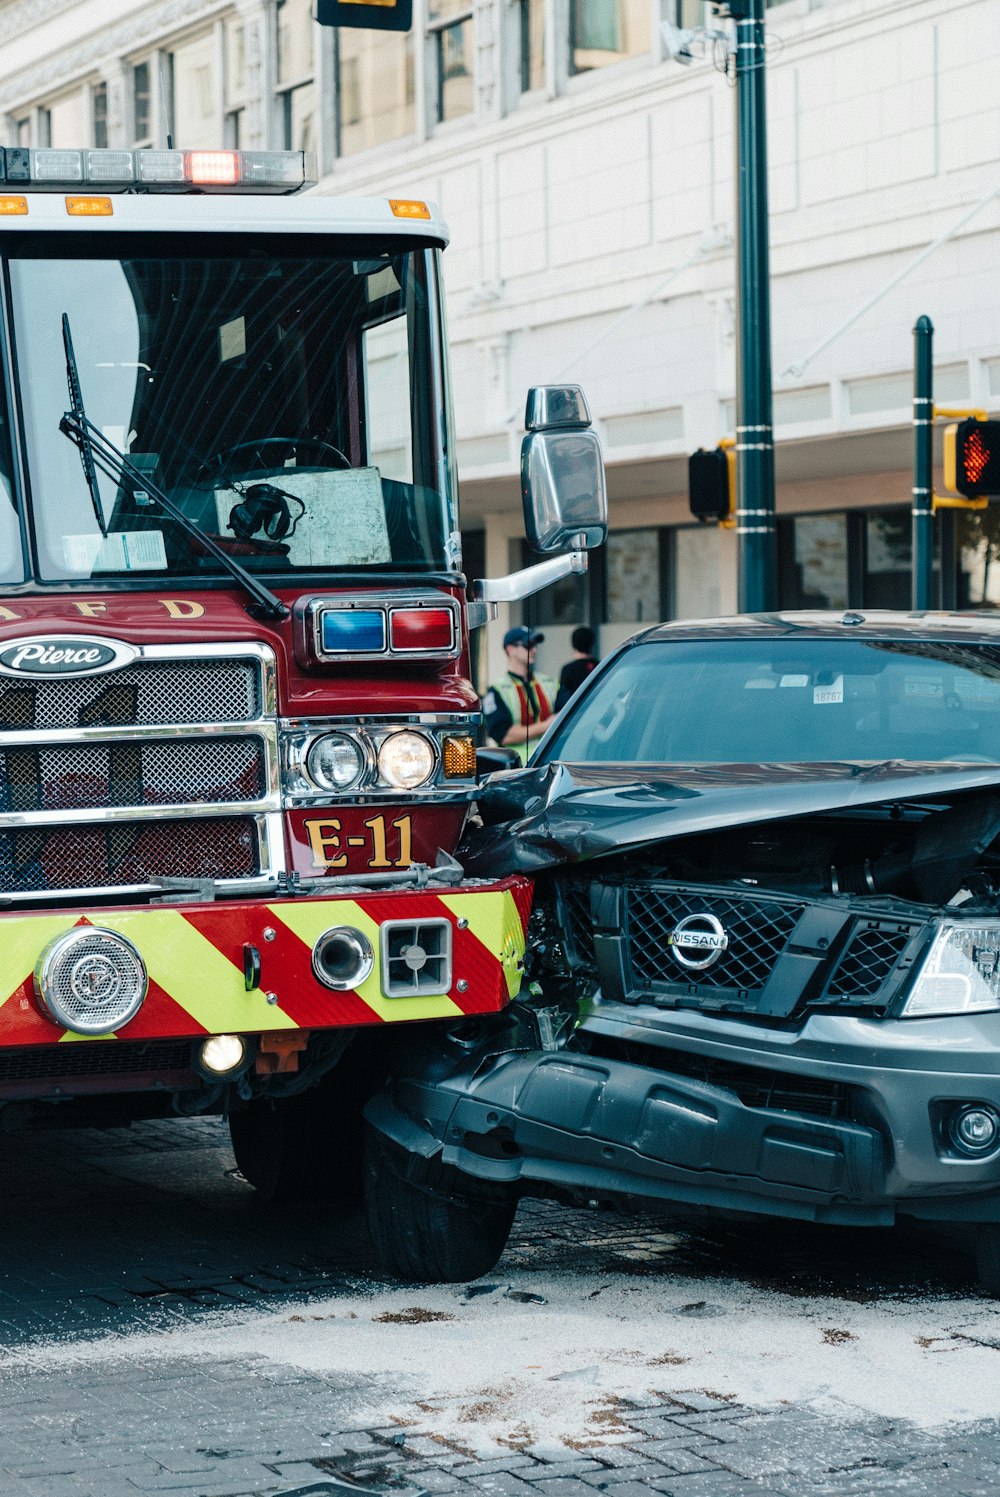 two vehicle collision during daytime